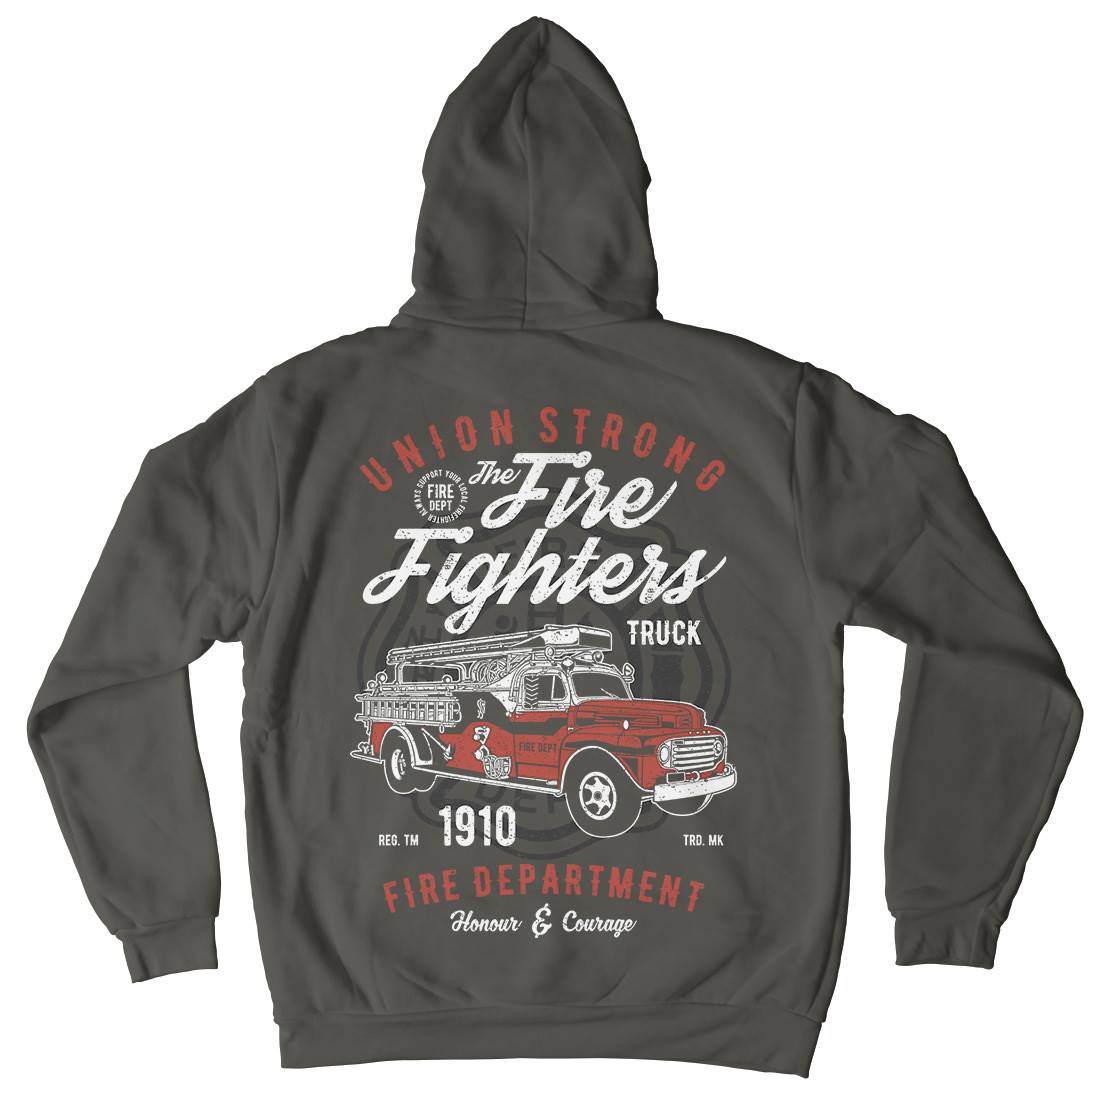 Union Strong Mens Hoodie With Pocket Firefighters A781